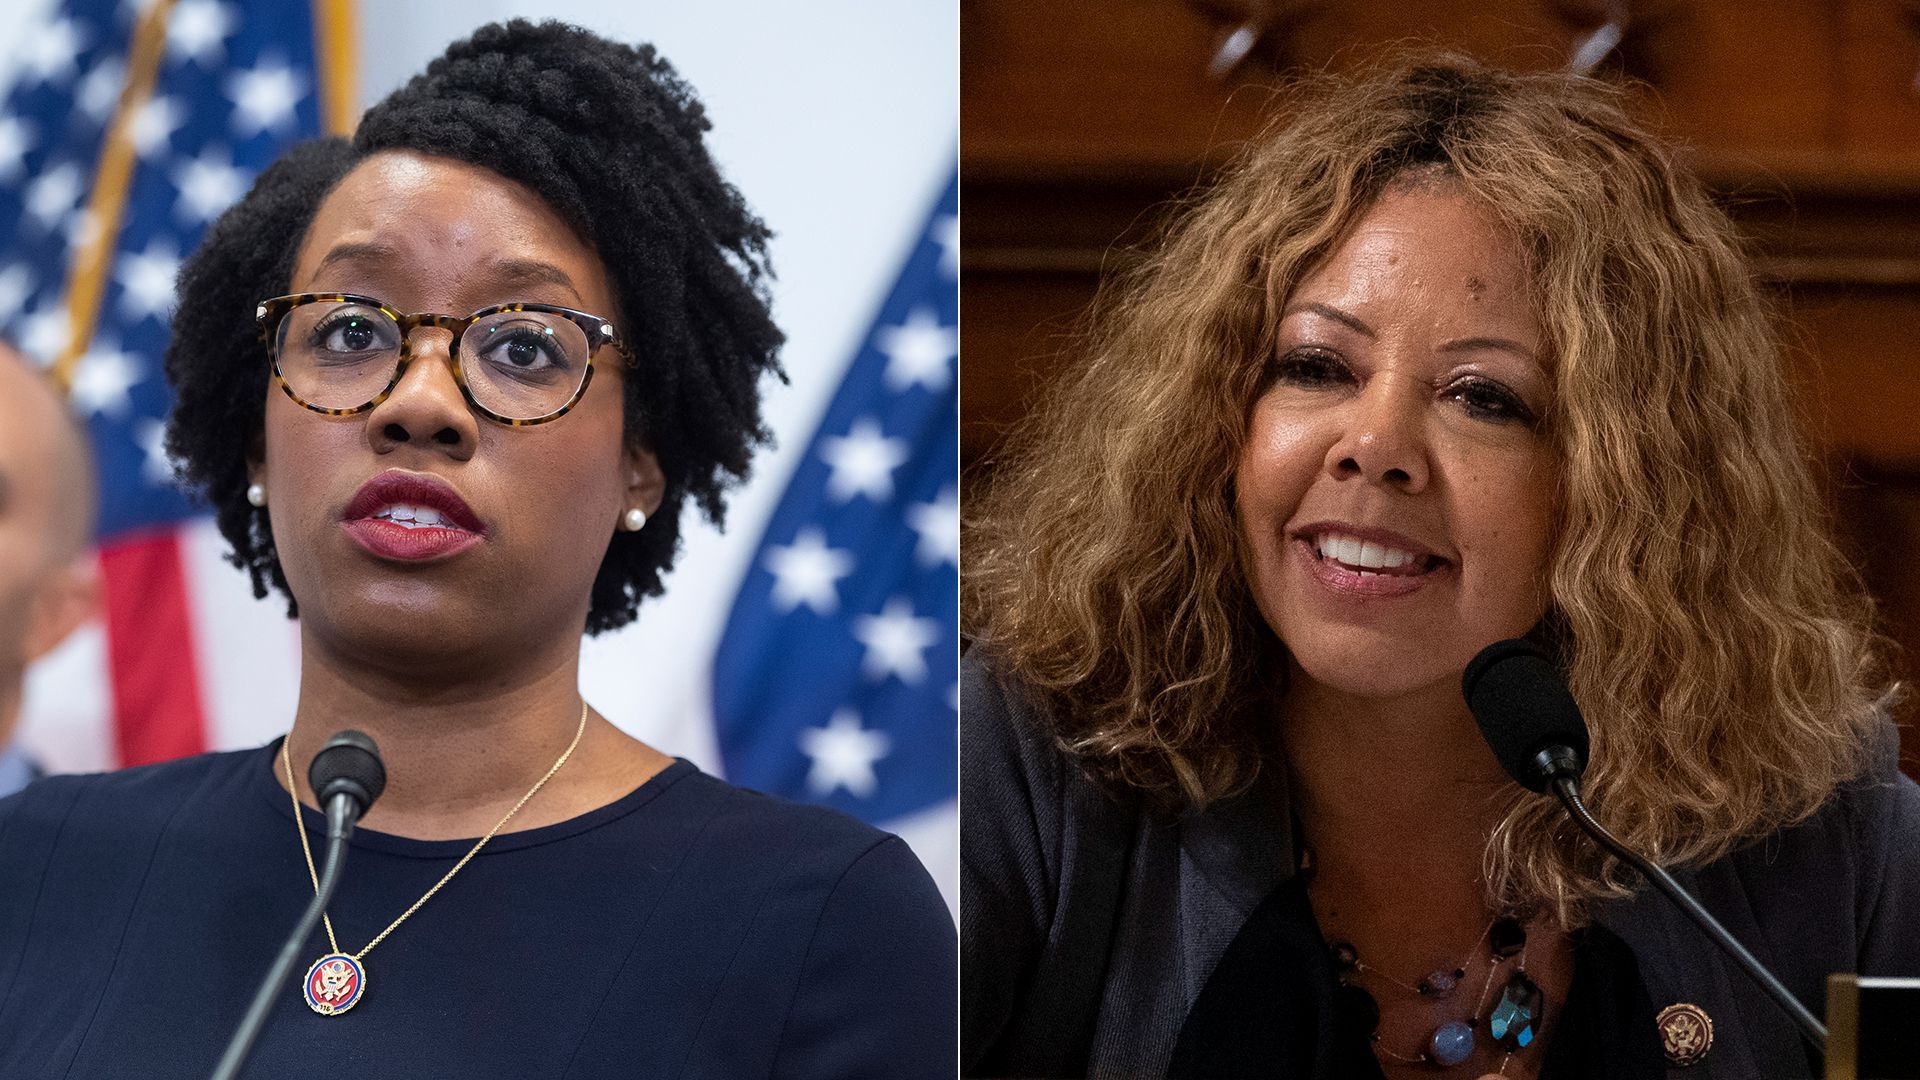 Reps. Lauren Underwood and Lucy McBath in side-by-side photos